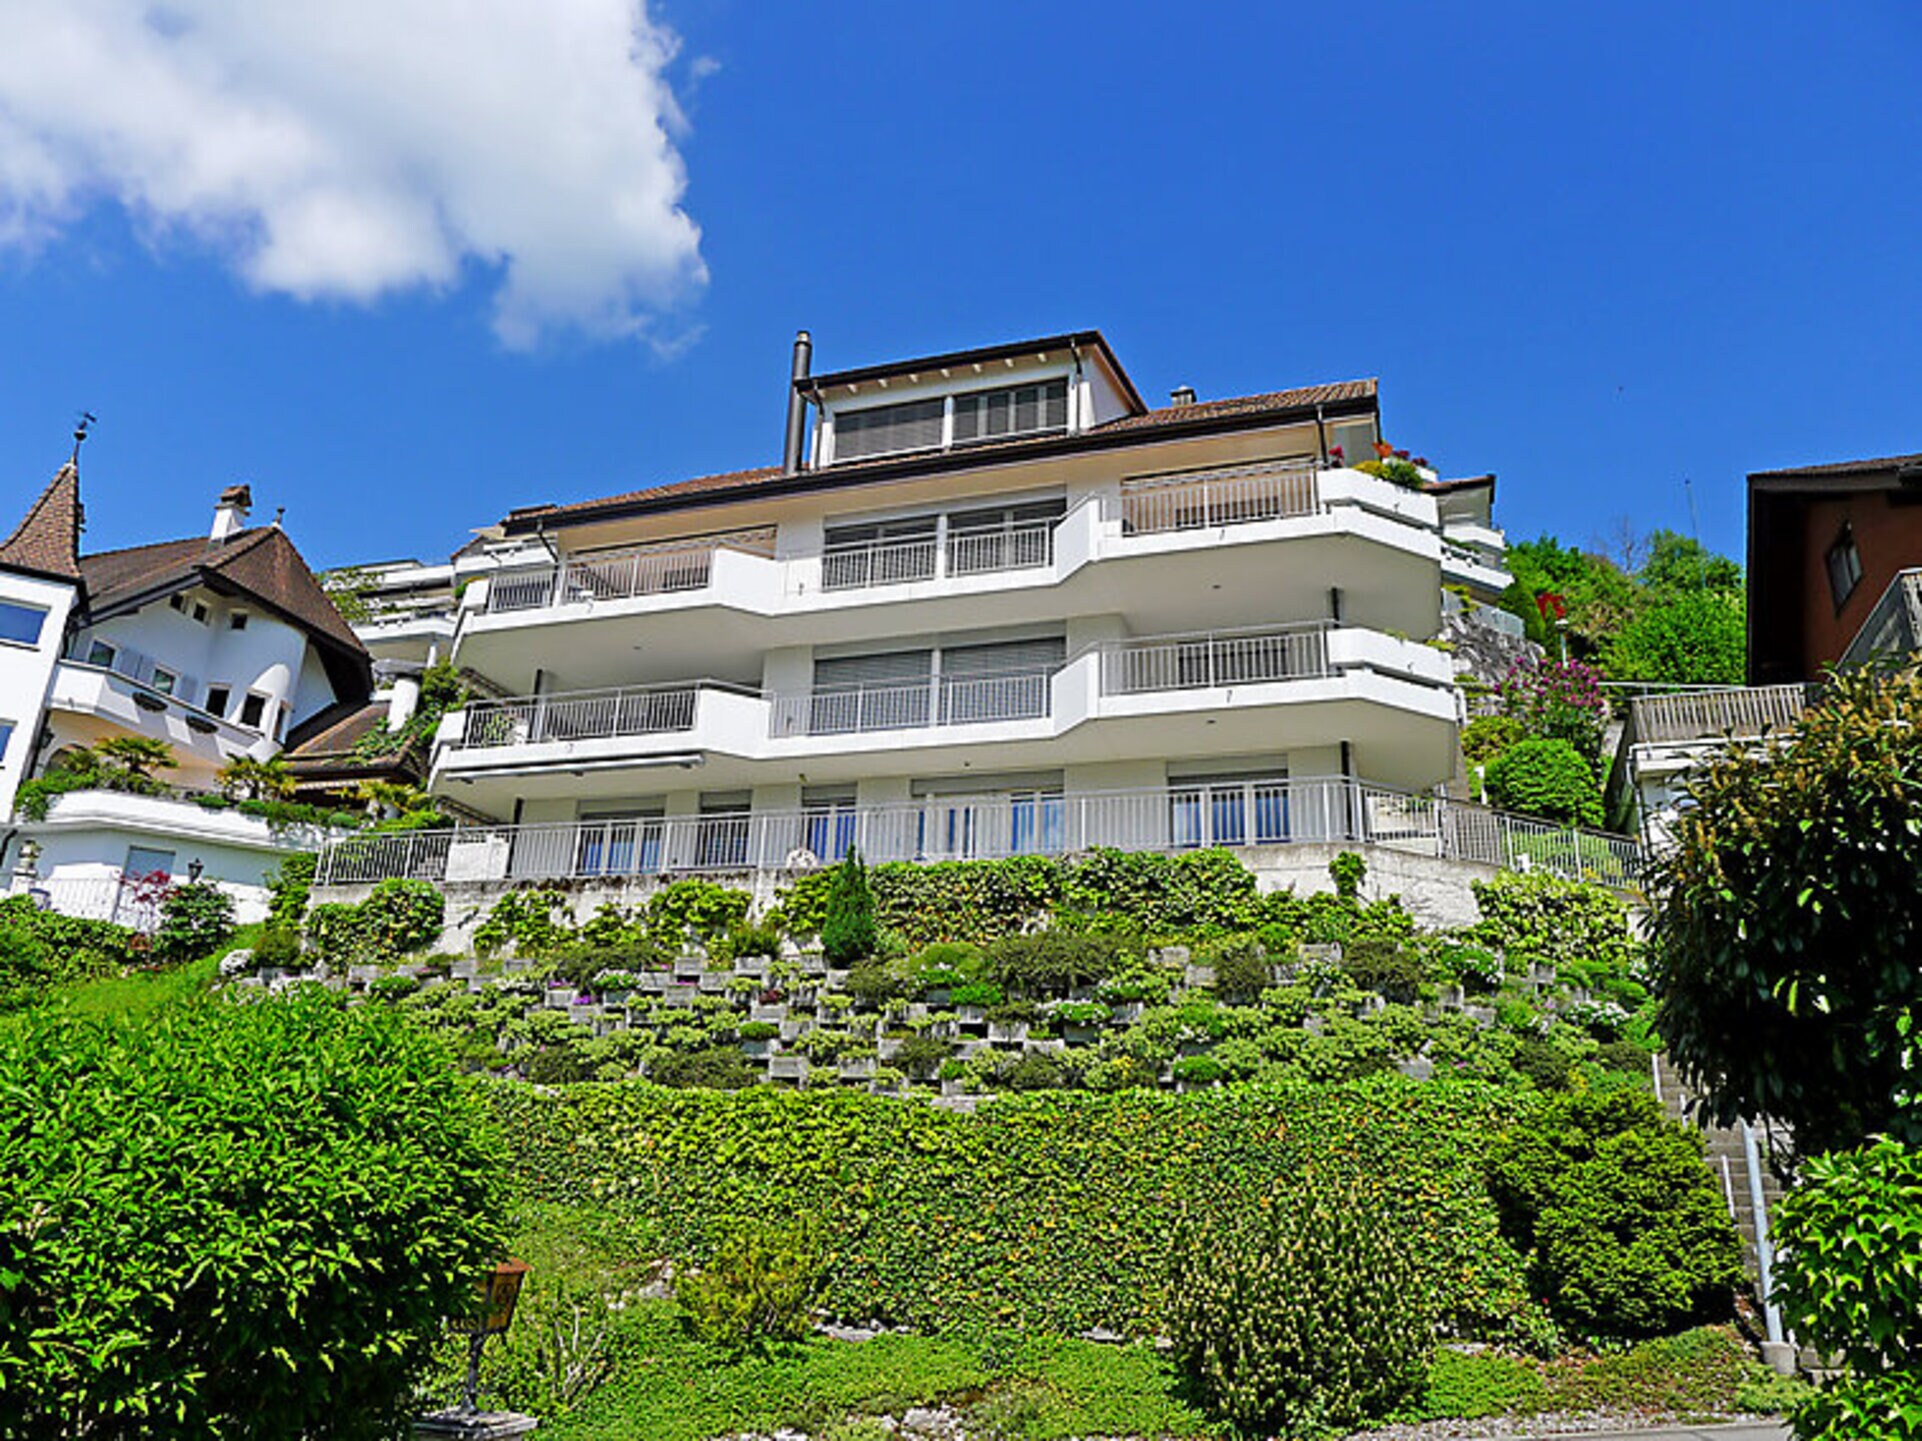 Property Image 1 - Property Manager Villa with First Class Amenities, Nidwalden Villa 1003